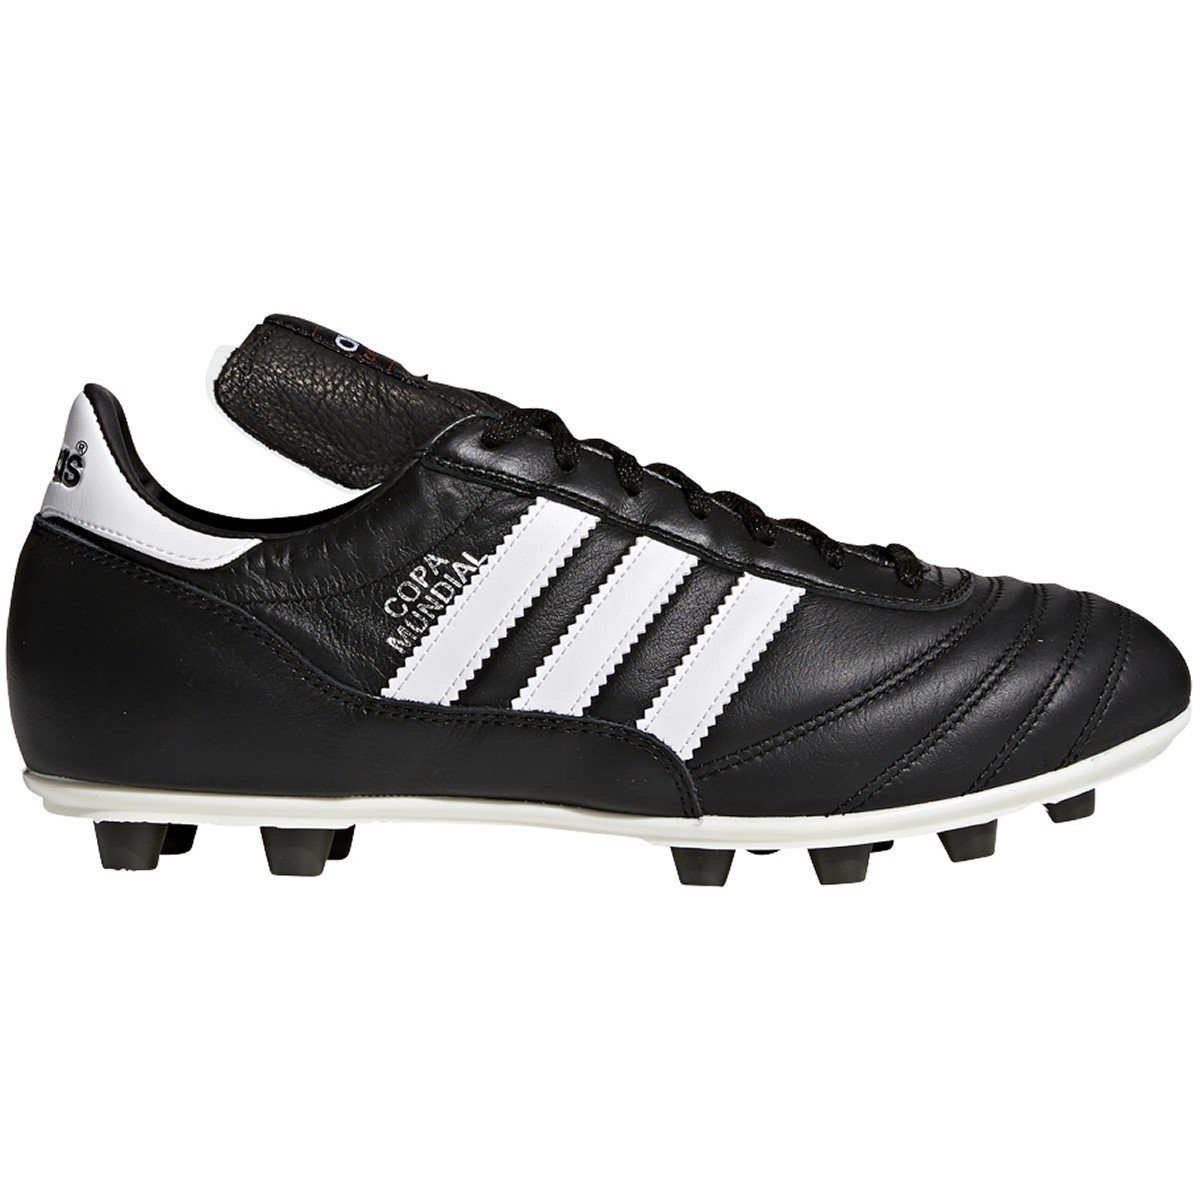 adidas Men's Copa Mundial Leather FG Cleats | 015110 Cleats Adidas 7 Black/White 